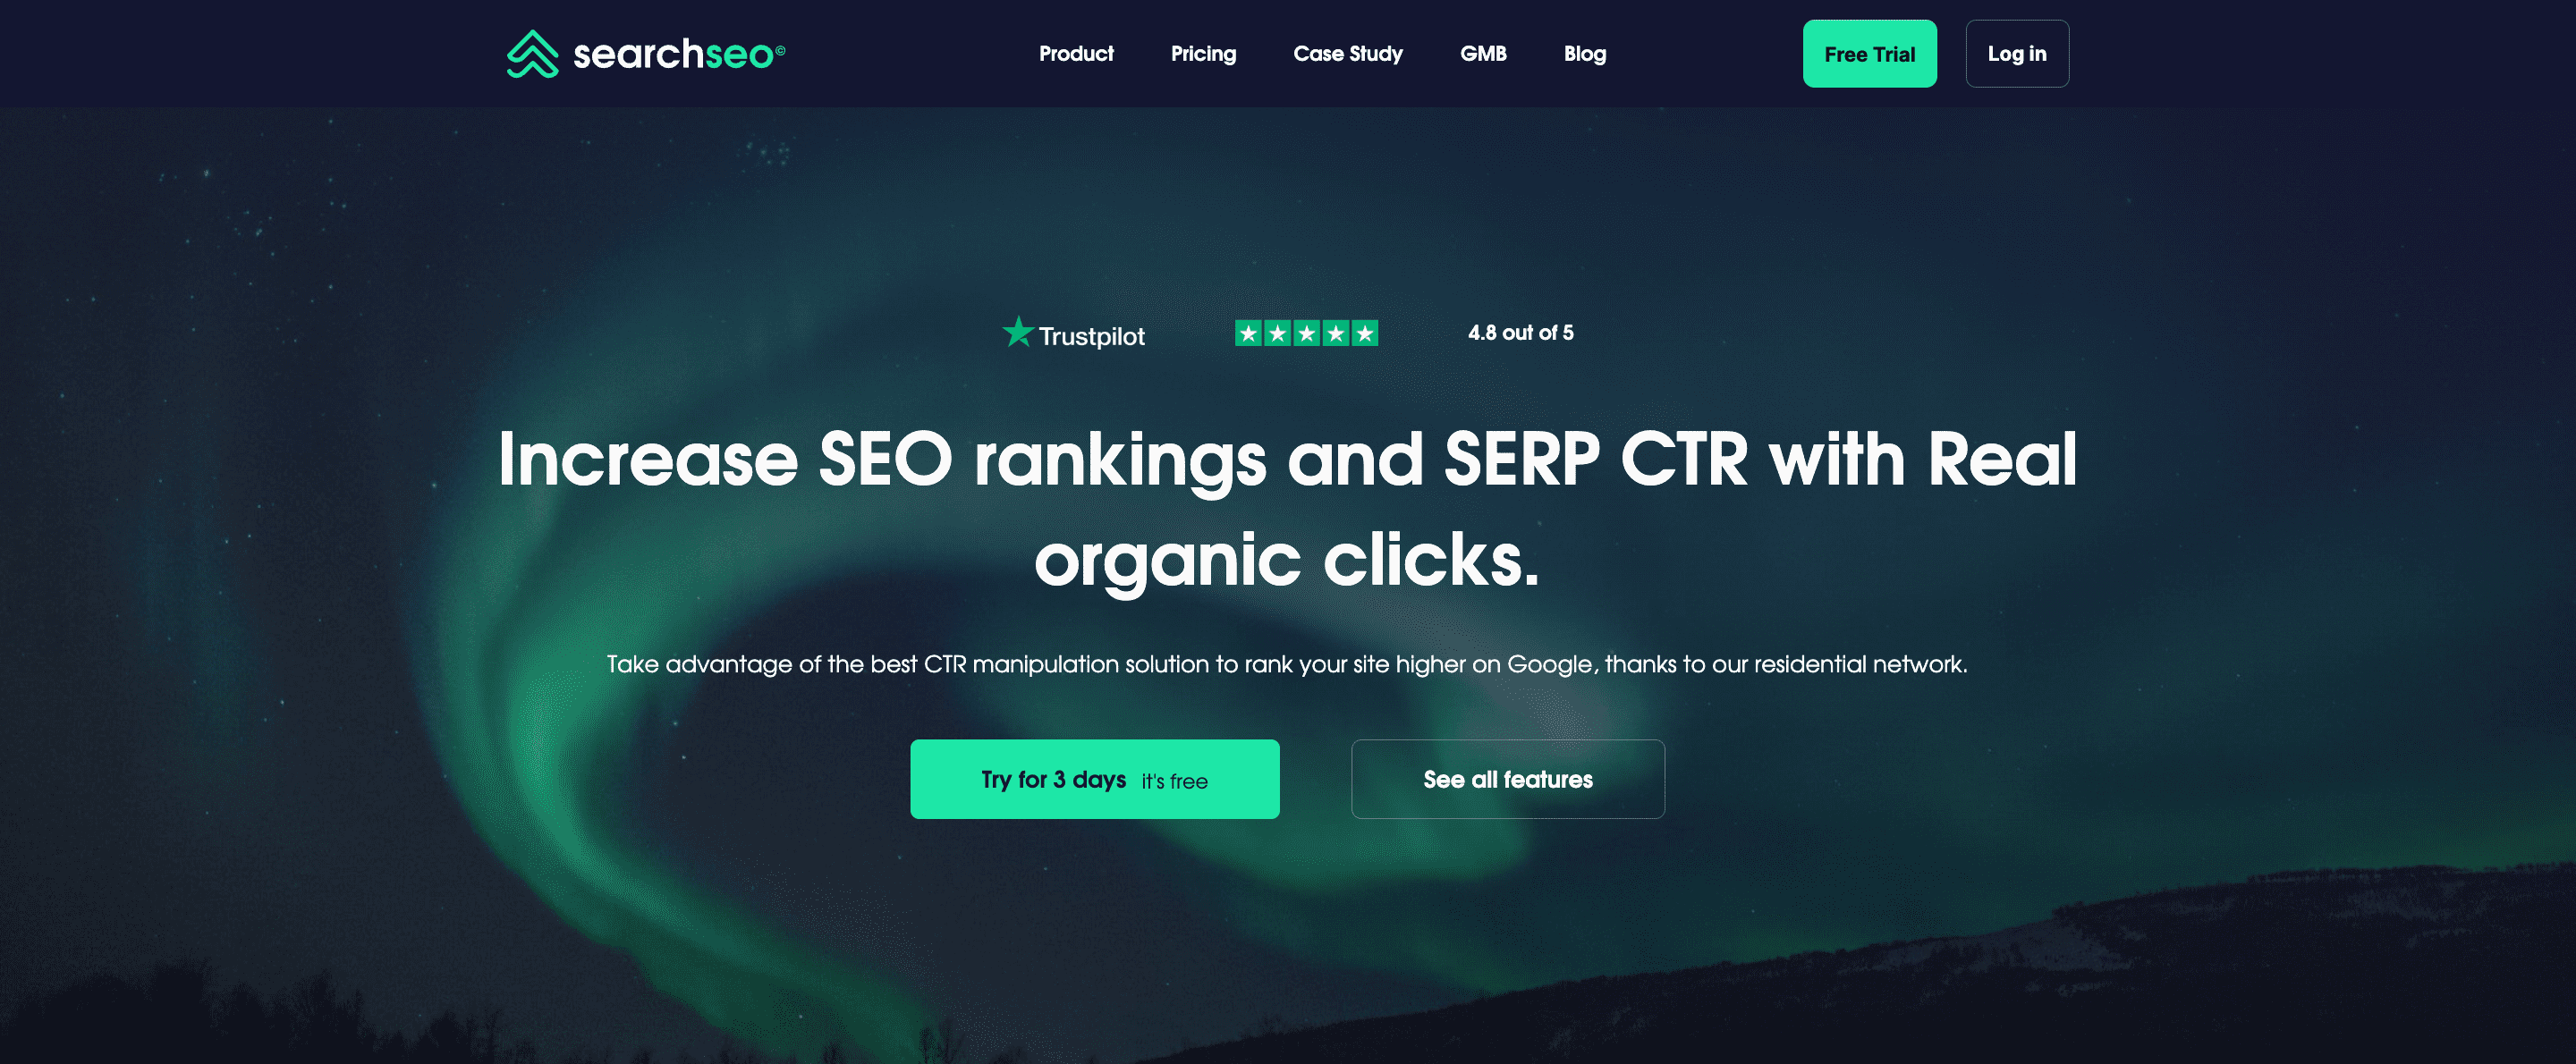 SearchSEO landing page.